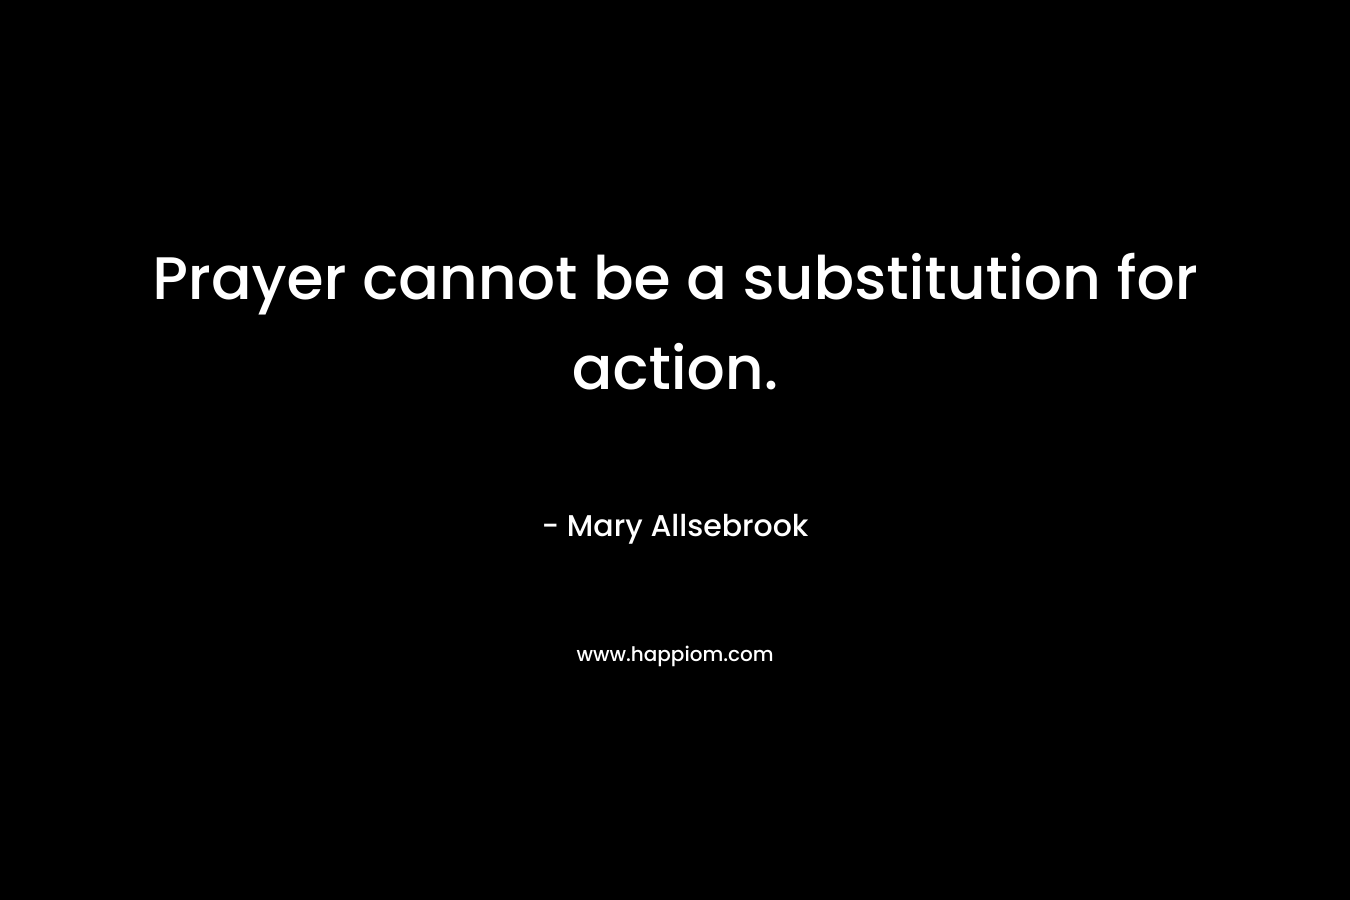 Prayer cannot be a substitution for action.